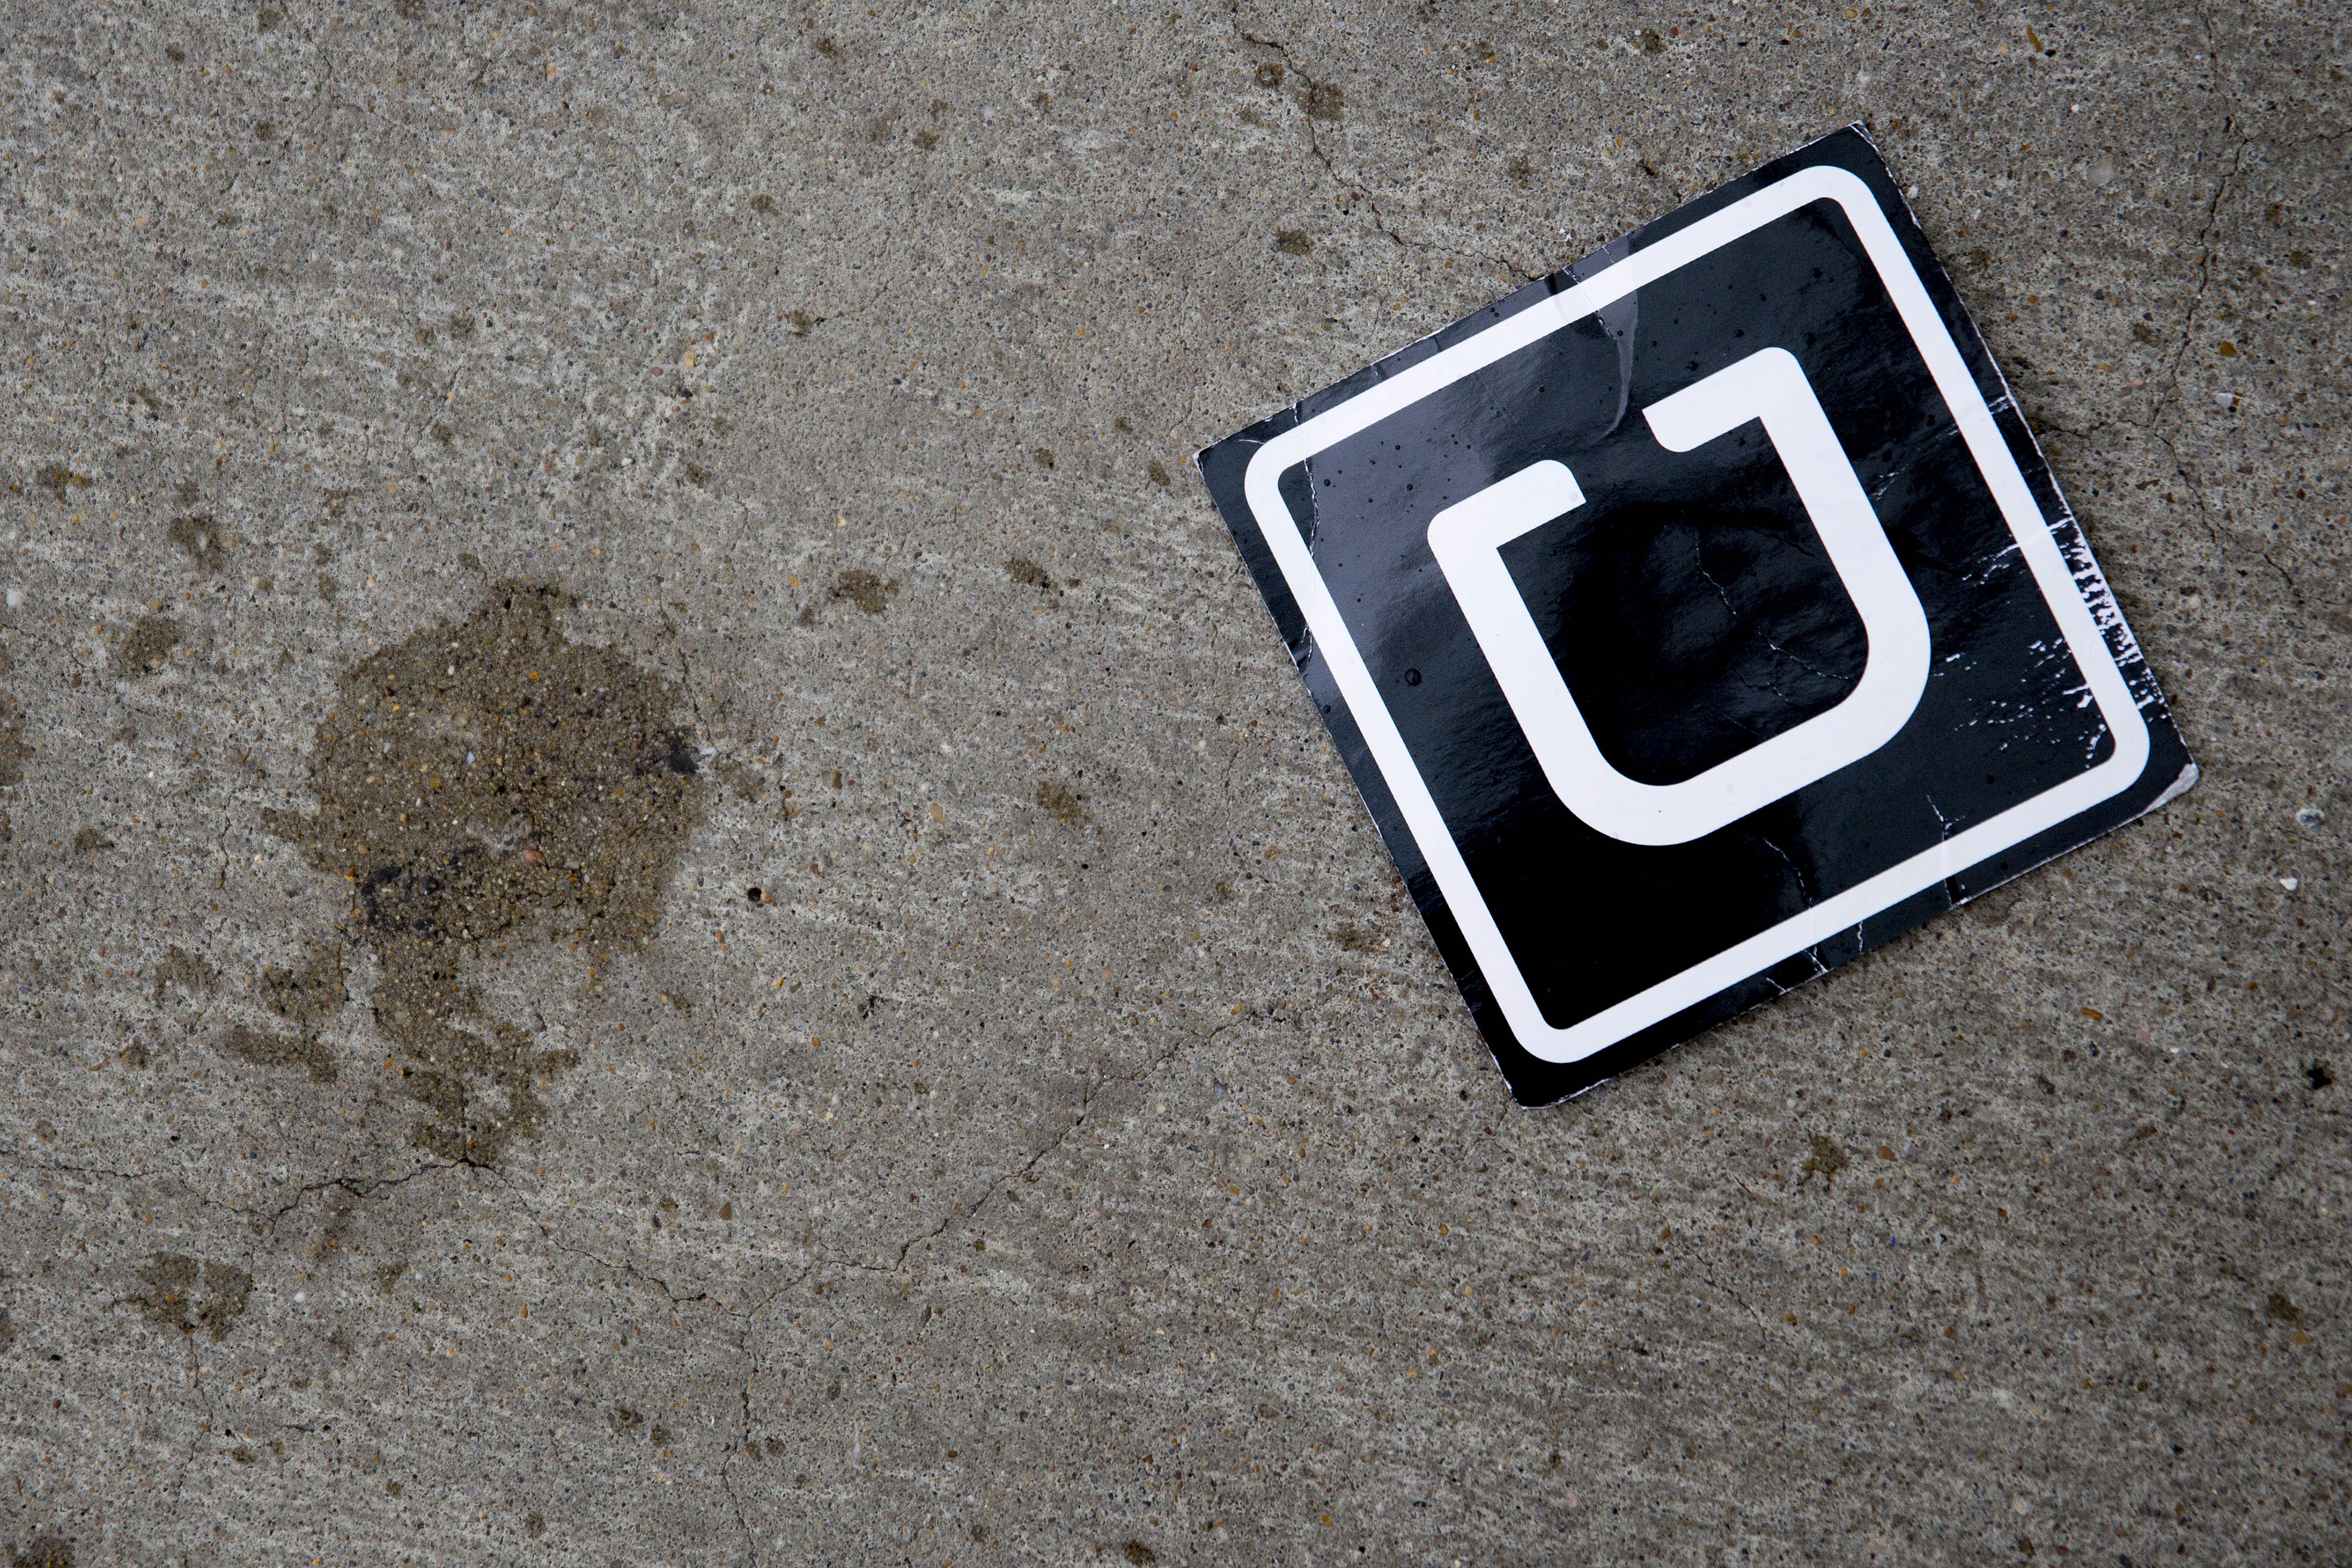 Uber At $40 Billion Valuation Would Eclipse Twitter And Hertz